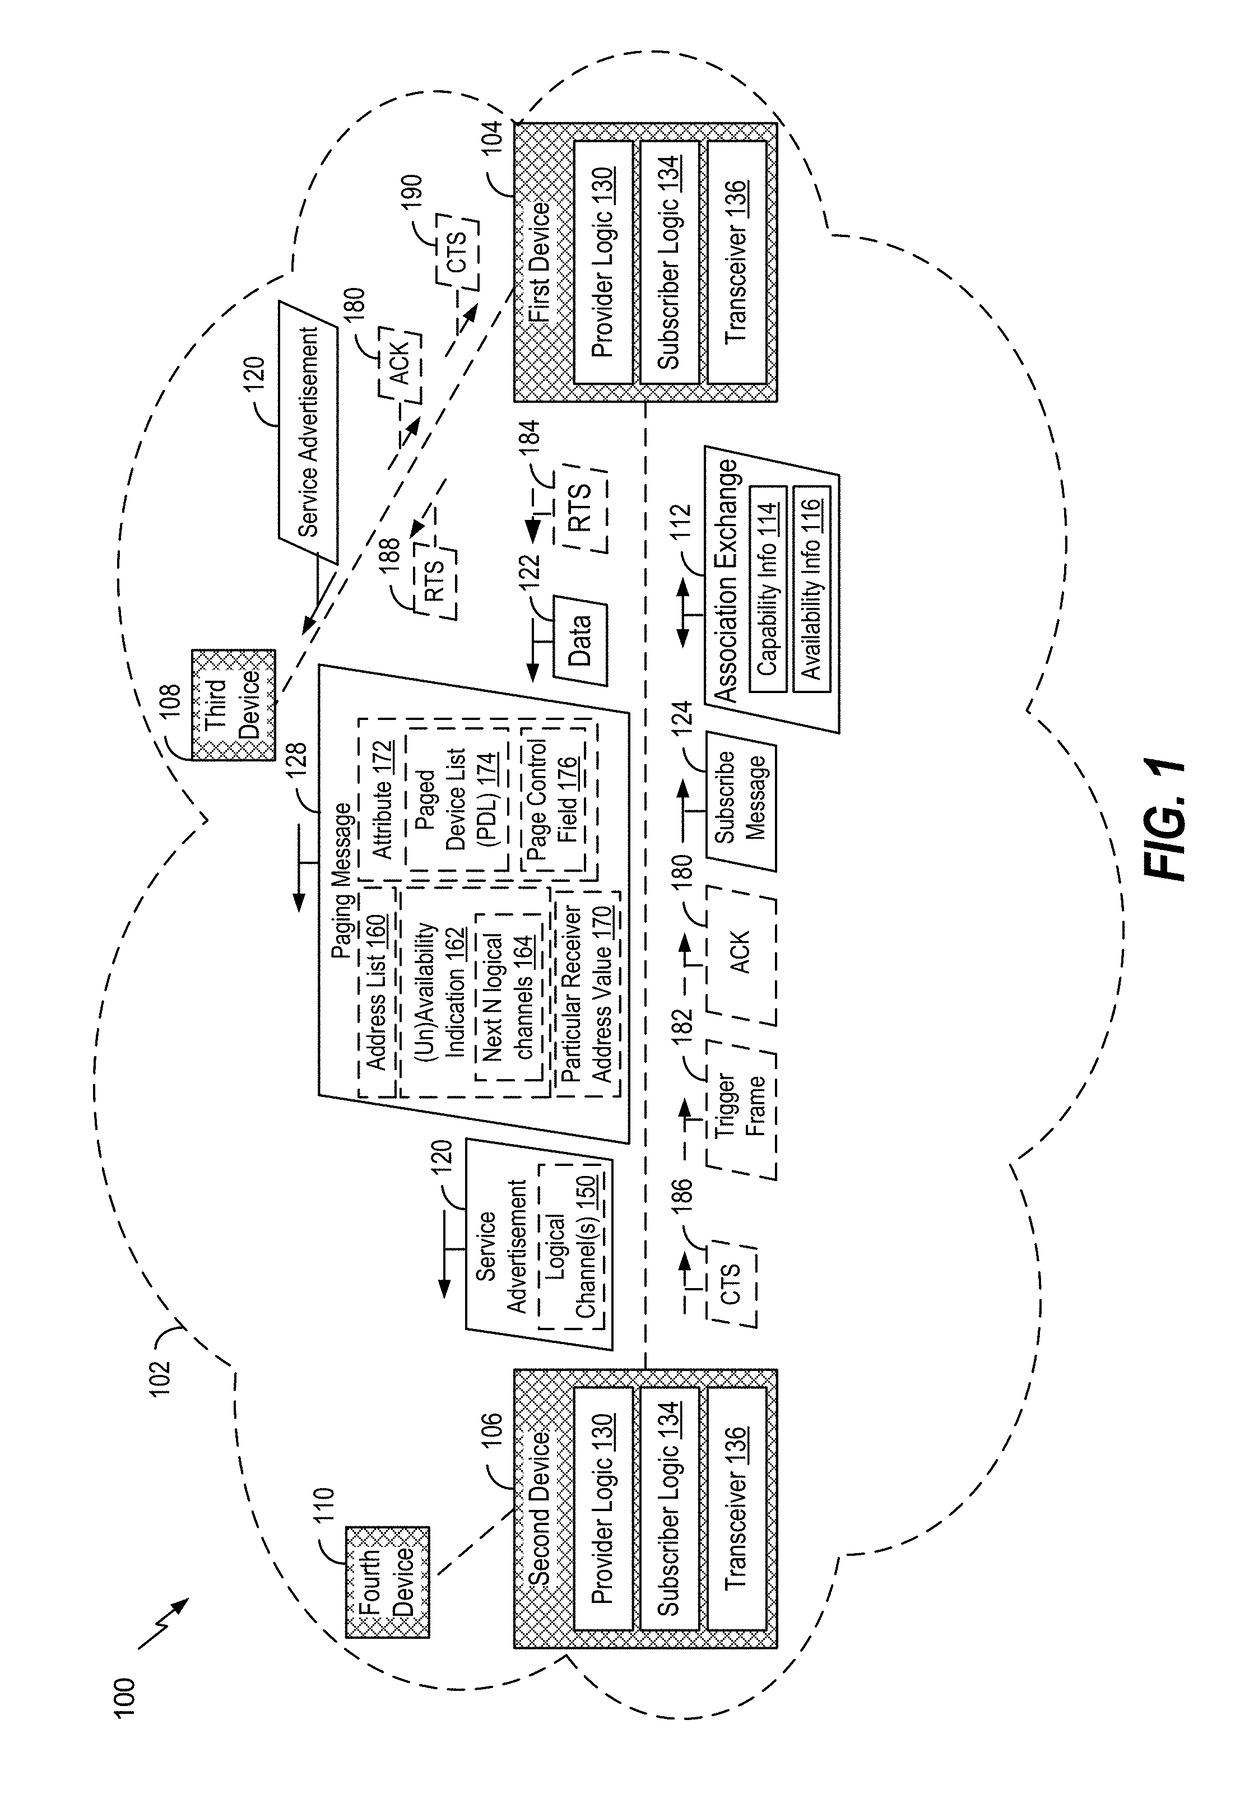 Communication between devices of a neighbor aware network